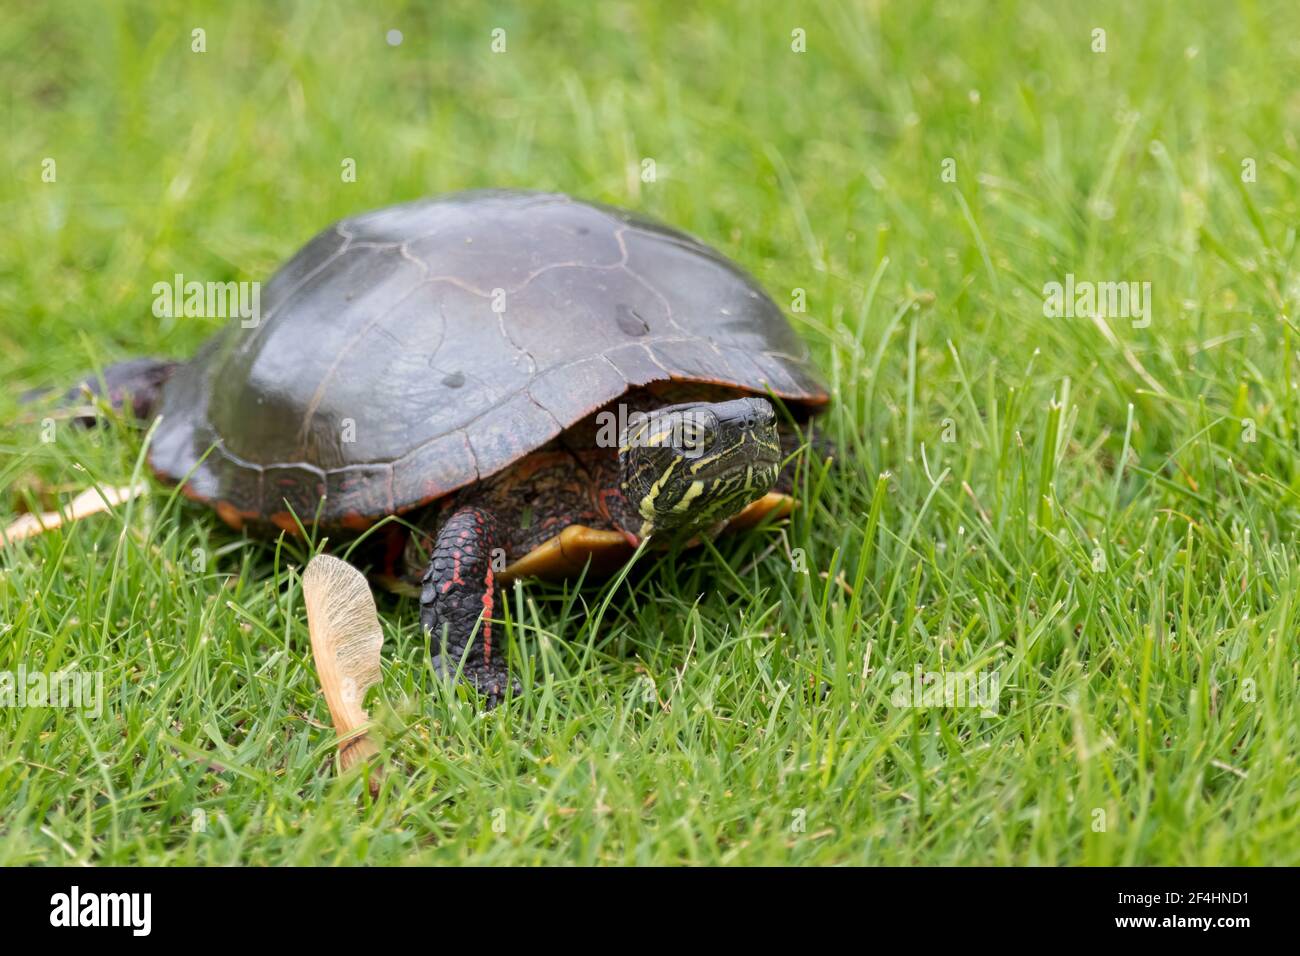 Painted turtle making its way slowly through dewy green grass Stock Photo